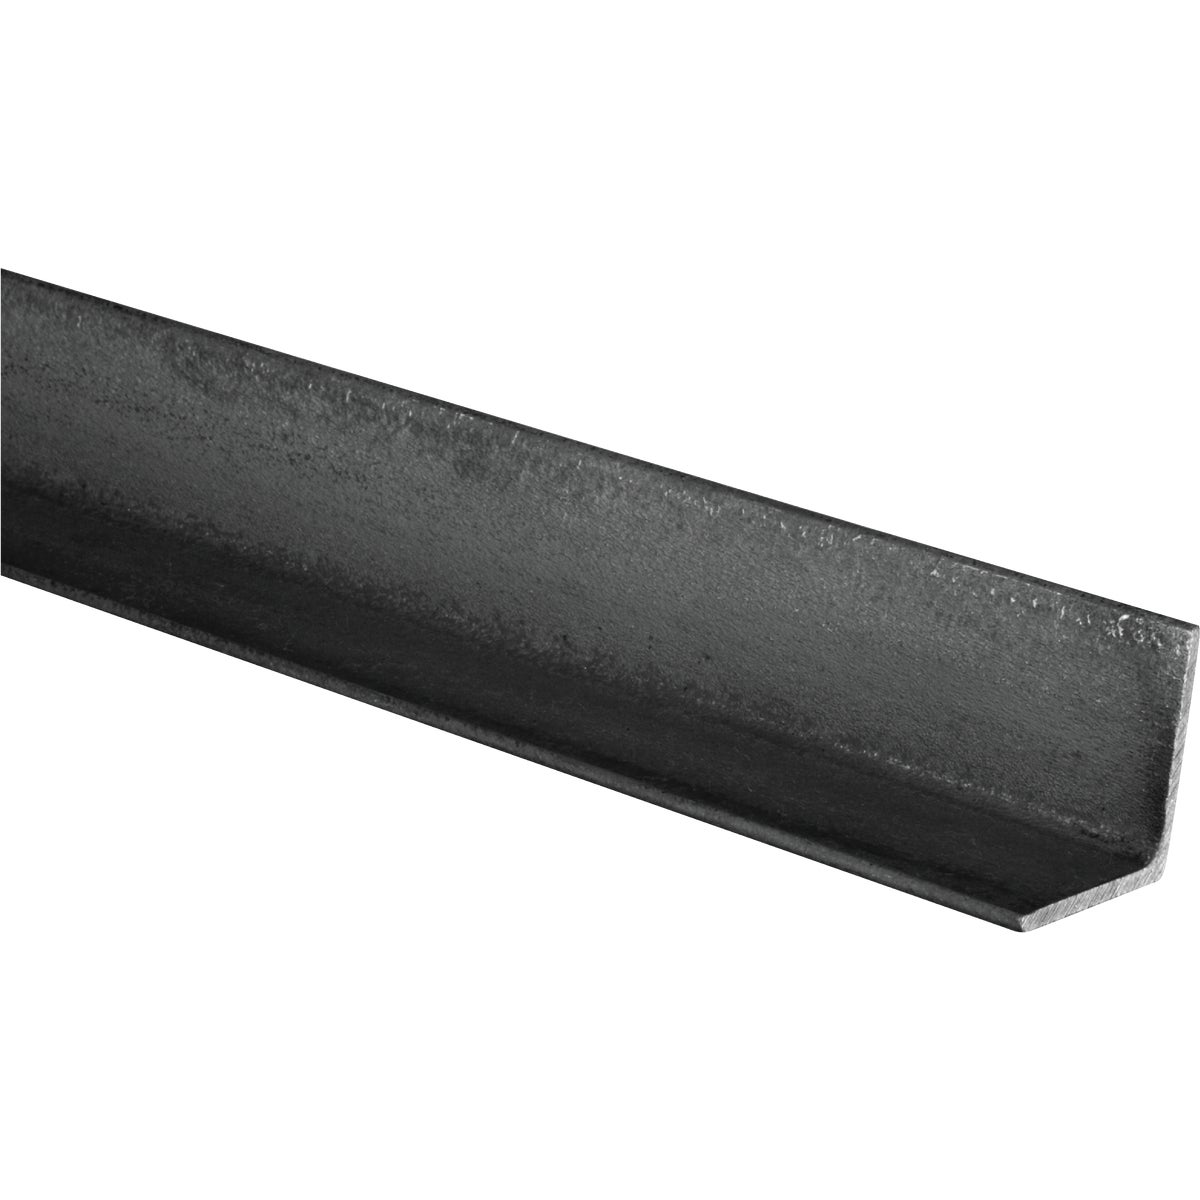 Hillman Steelworks 1-1/4 In. x 4 Ft., 1/8 In. Weldable Solid Angle